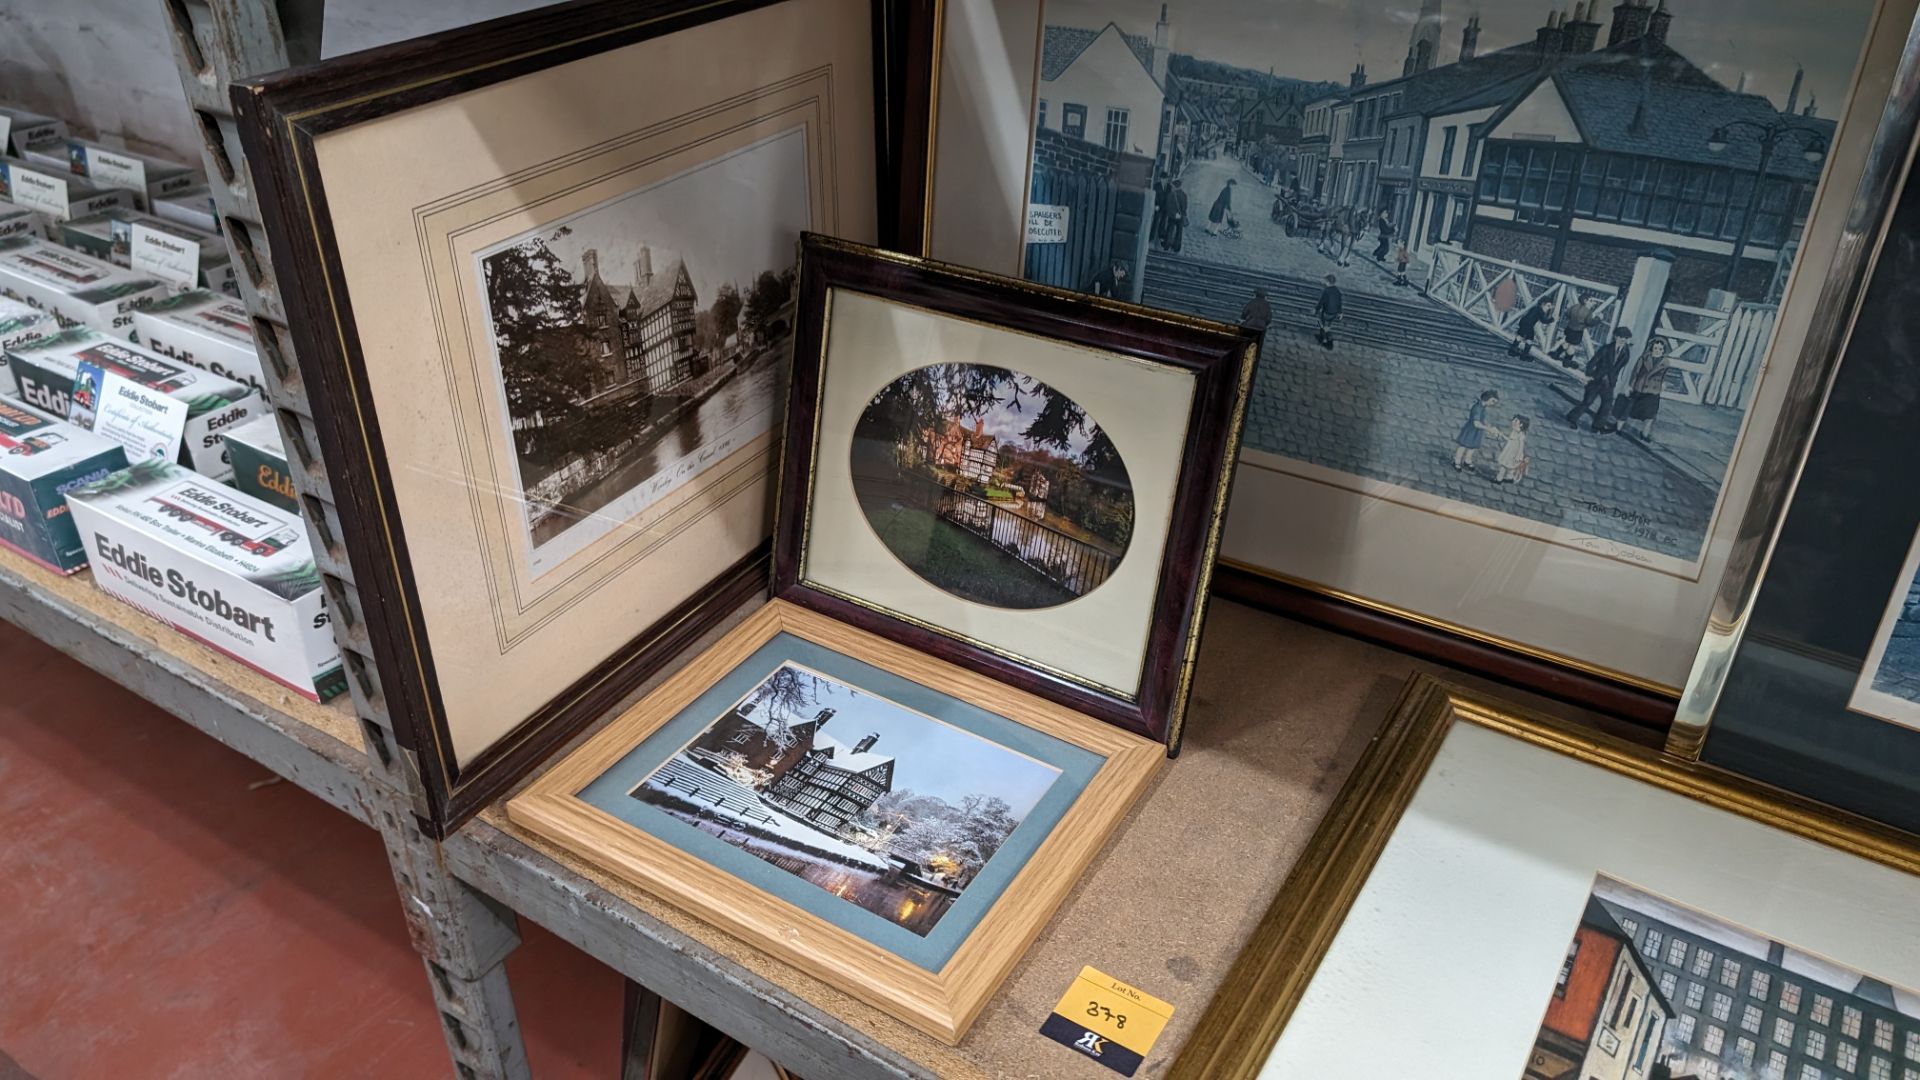 The contents of a bay of framed prints & pictures including reproduction Lowry, vintage photographs, - Image 3 of 14